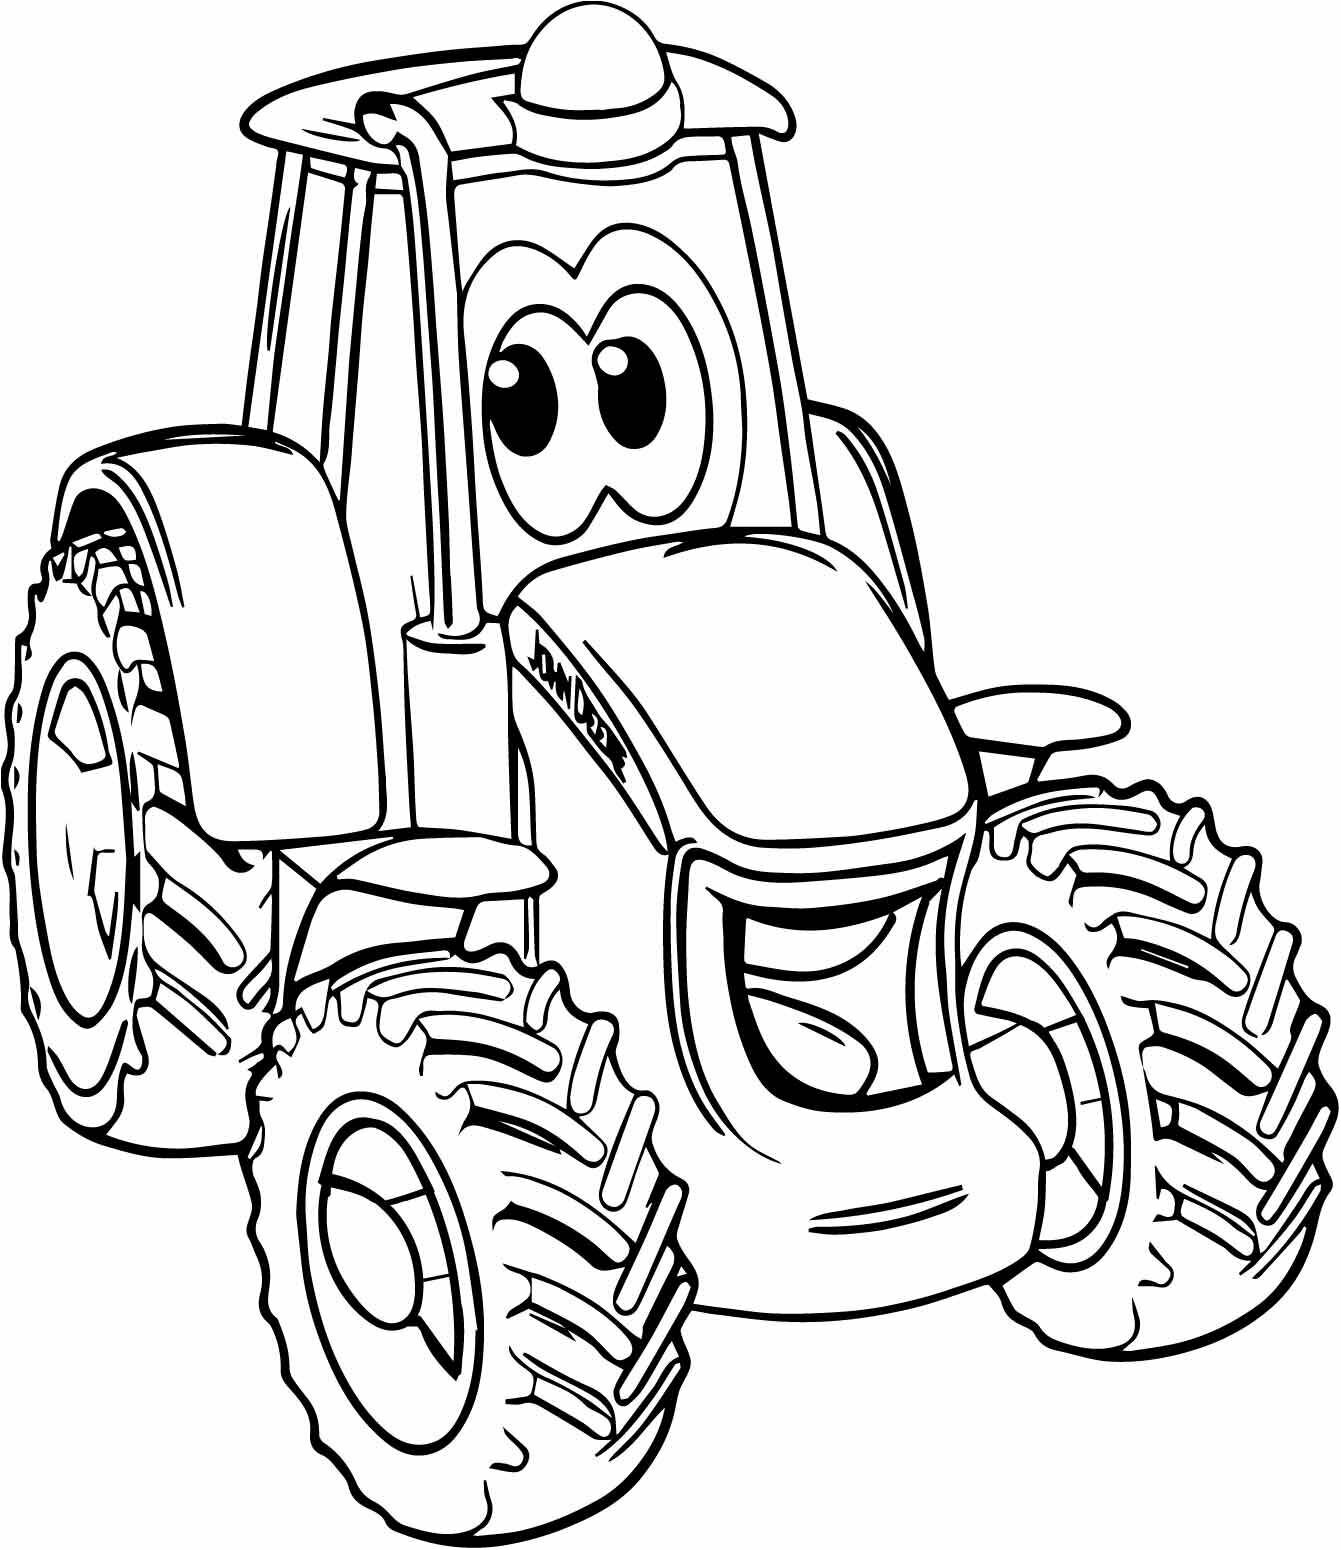 magnificent Tractor Coloring Pages Tractor Coloring Pages Smile John Deere stylish structure – john deere tractor coloring pages free